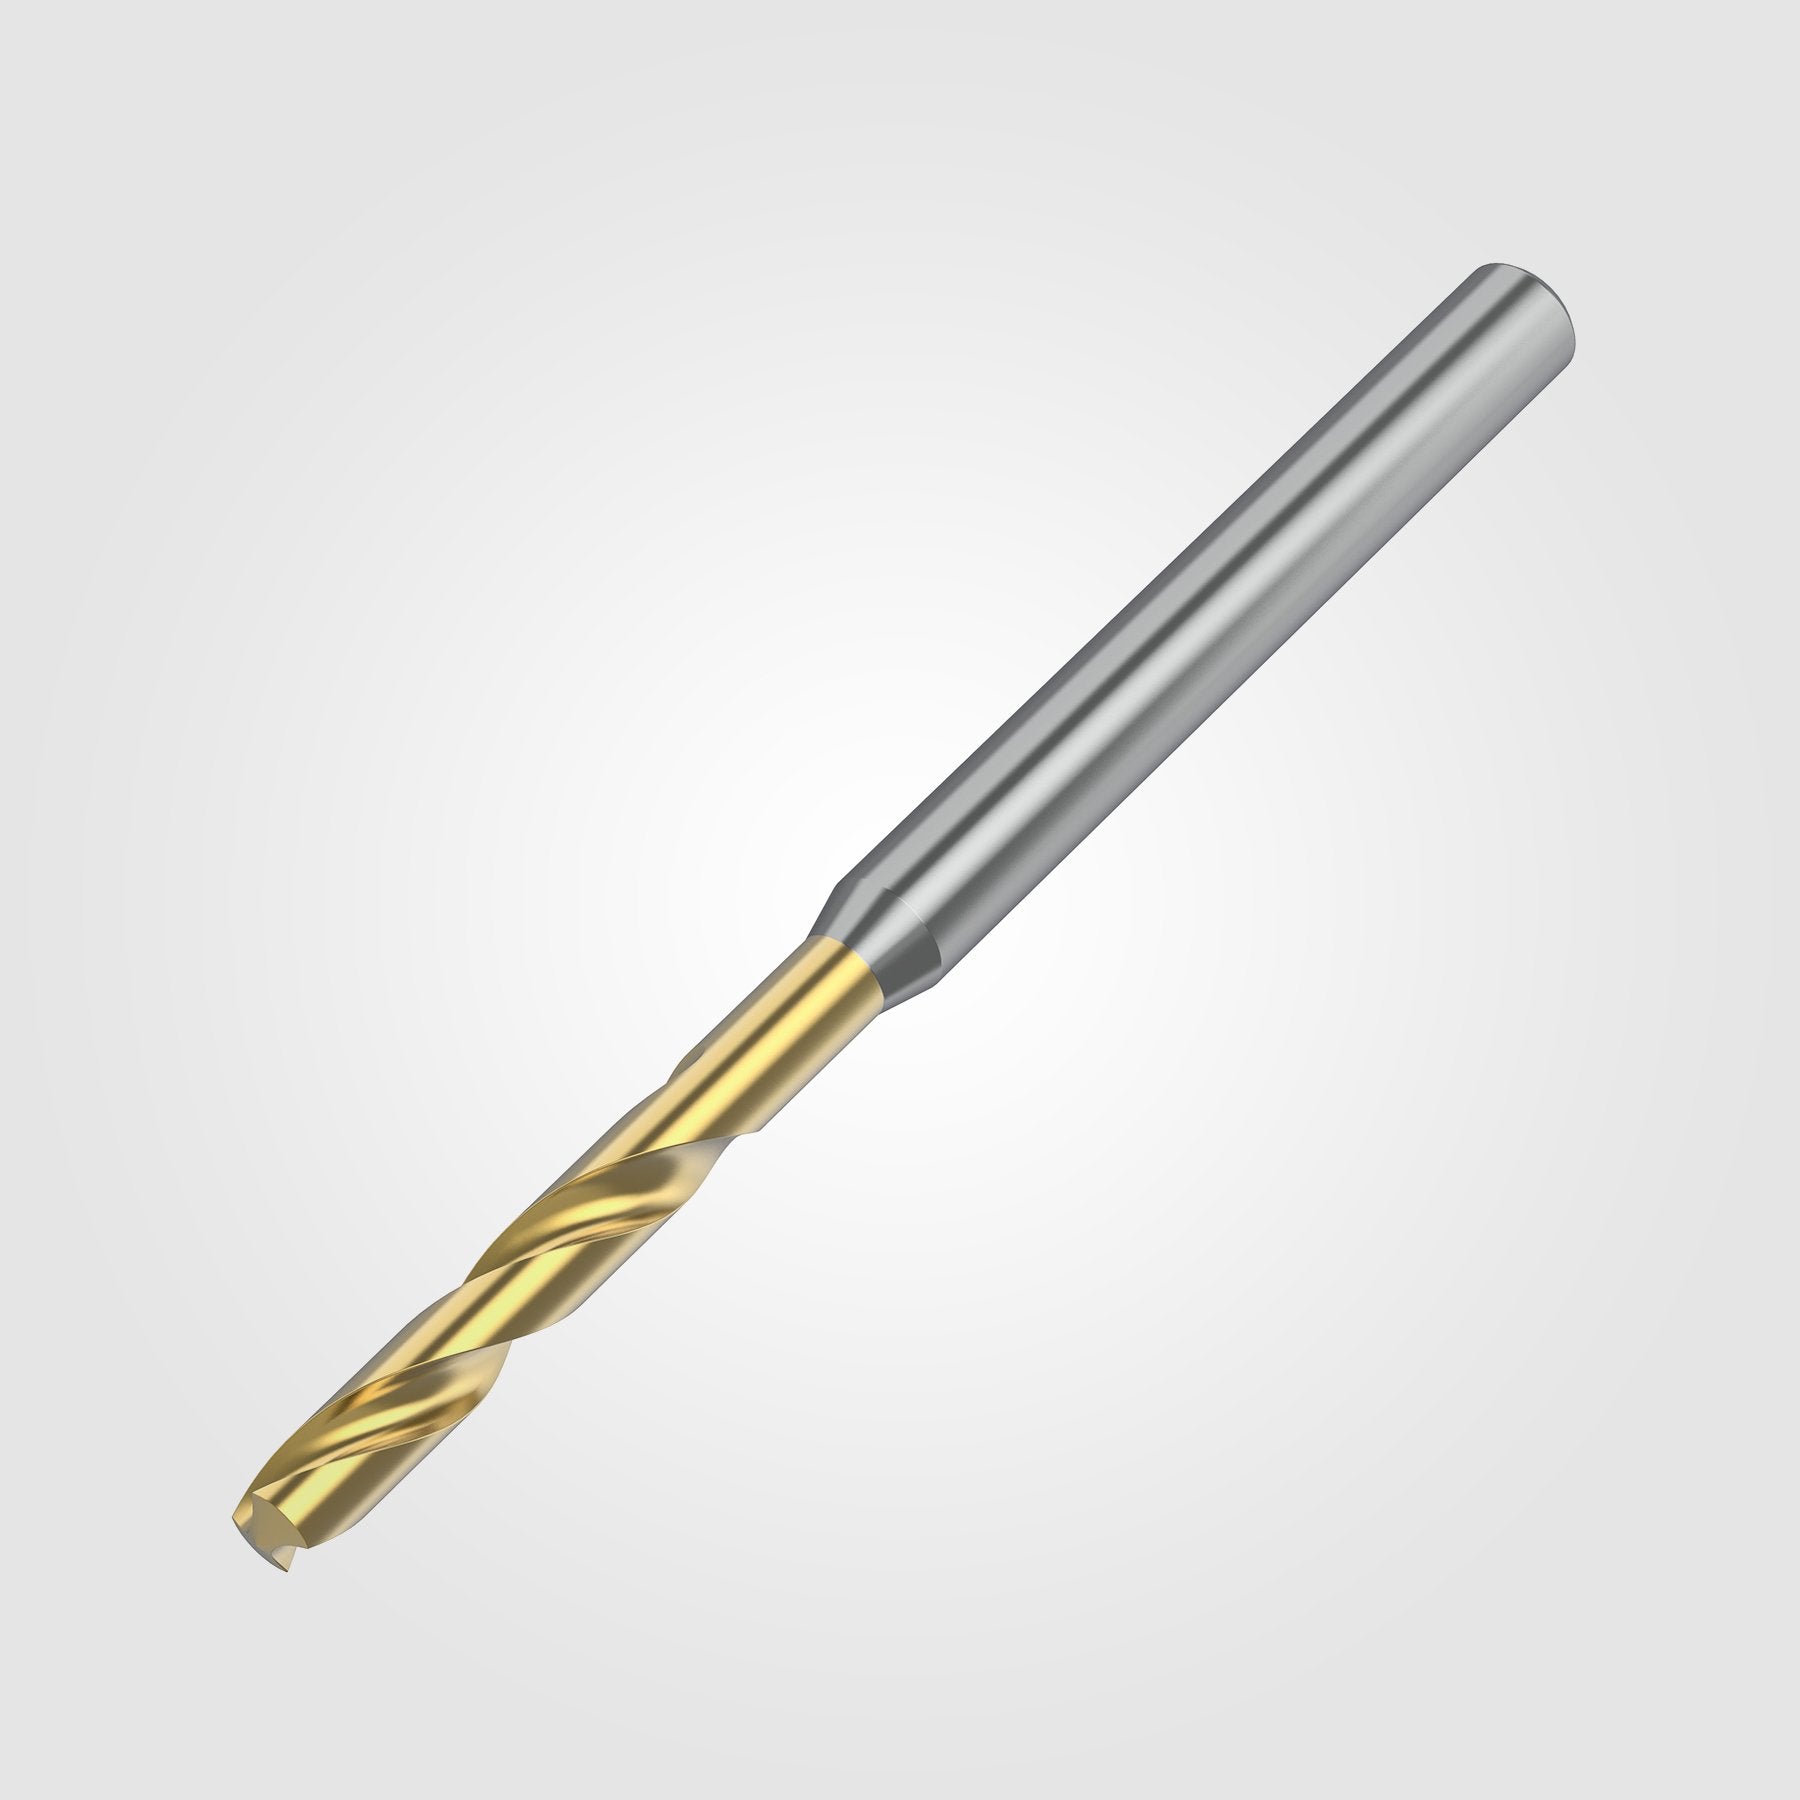 GOdrill (THROUGH COOLANT) | 14.2mm / .5591" / 3xD | SOLID CARBIDE DRILL | 4151253